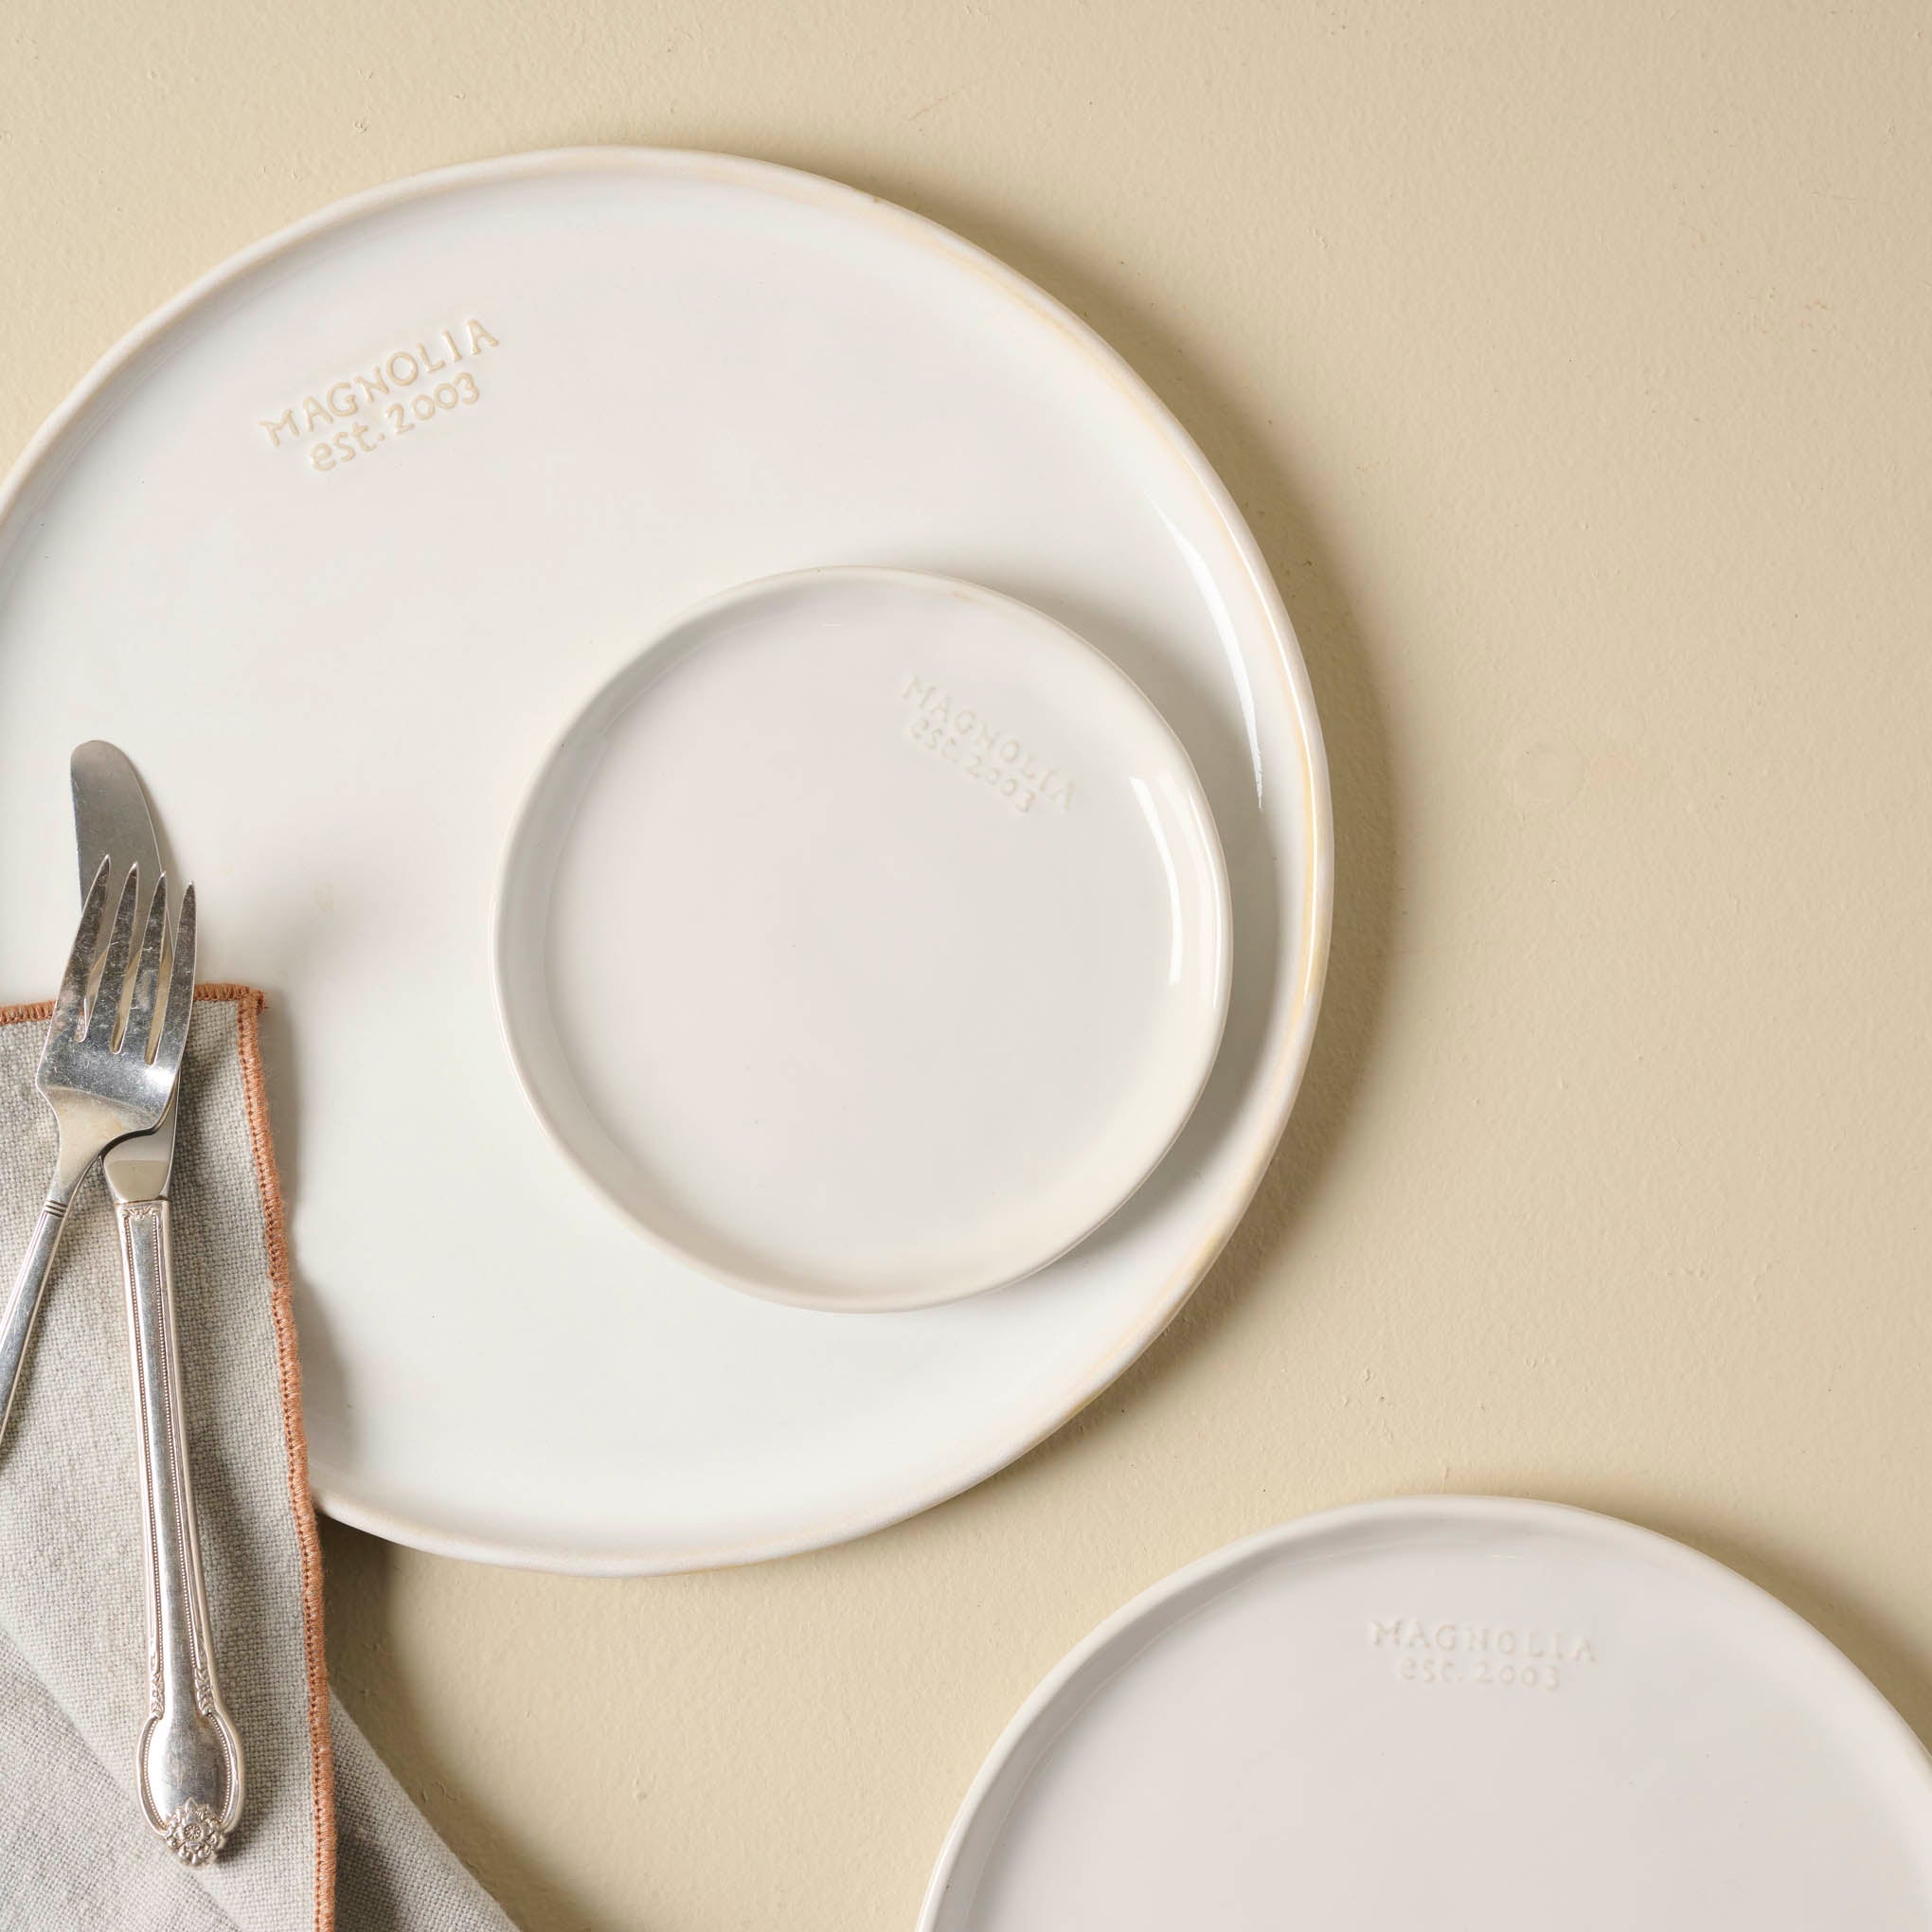 Magnolia Est. Plates in all 3 sizes shown with silverware Items range from $8.00 to $16.00